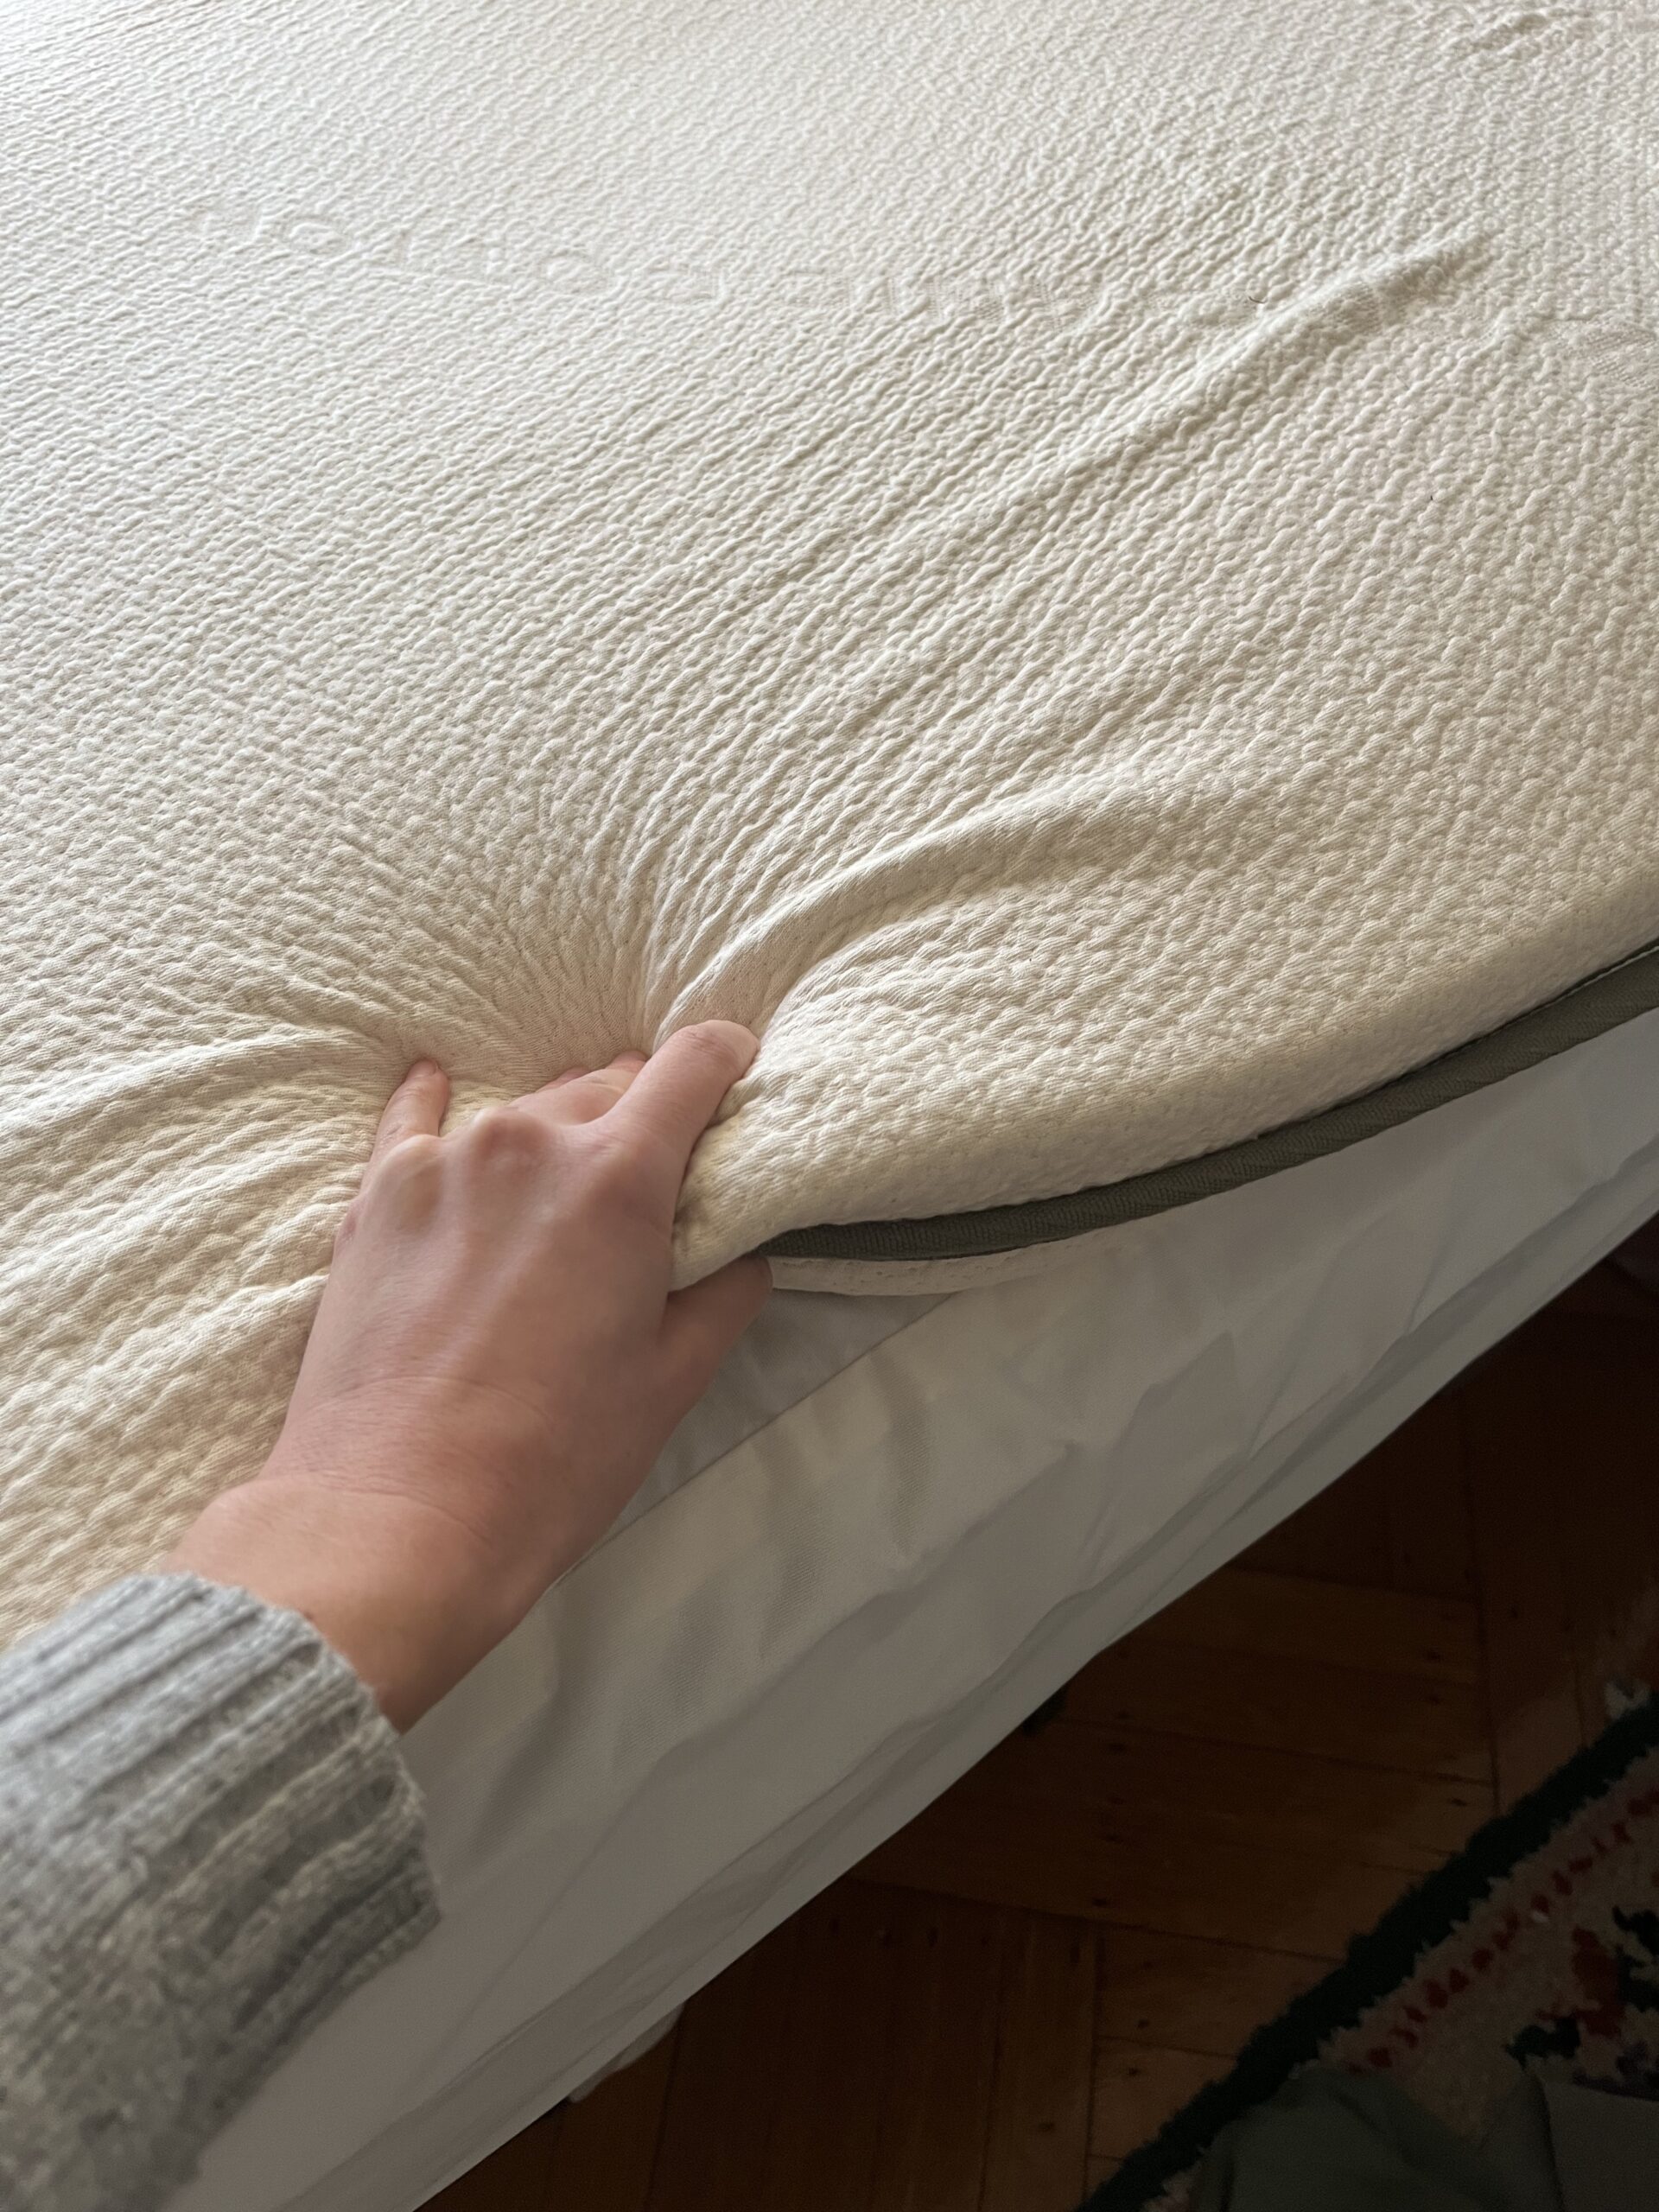 Our editor testing the mattress topper from Avocado